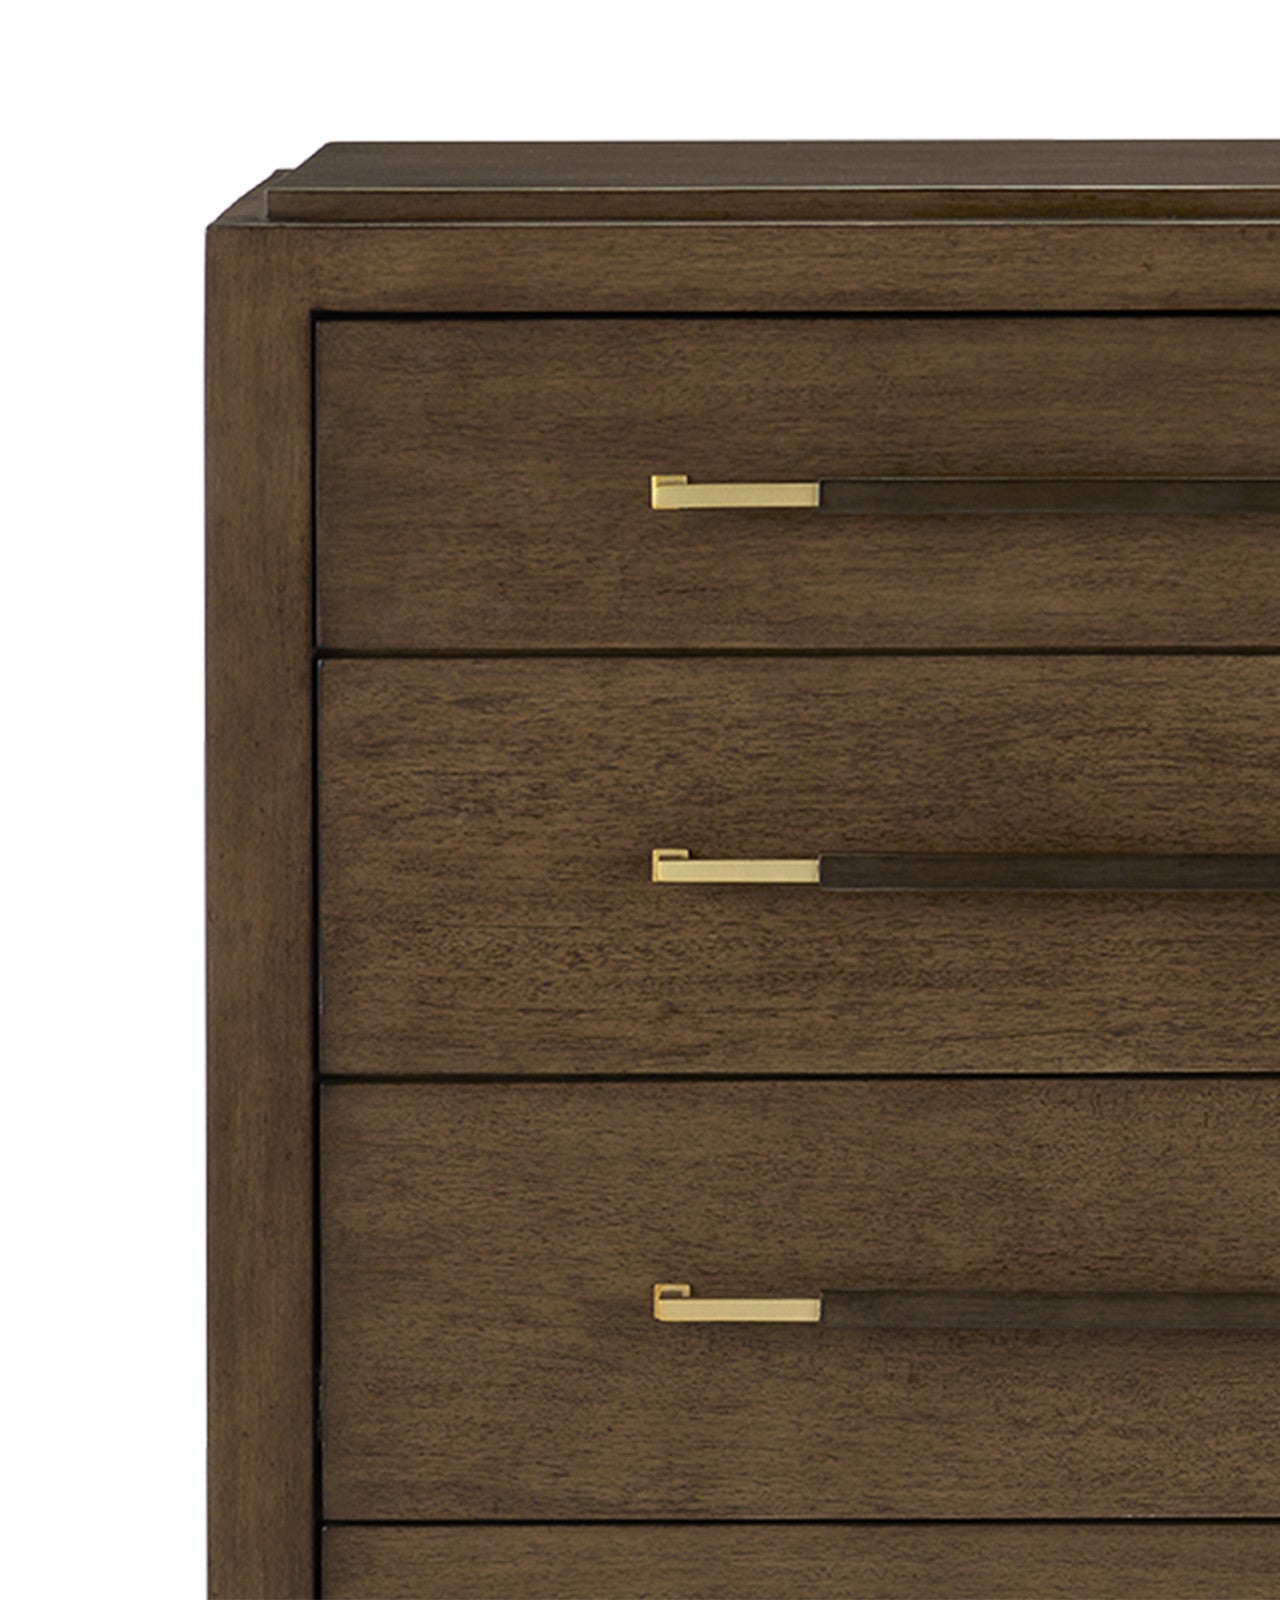 Verona Chanterelle Five-Drawer Chest by Currey & Co.